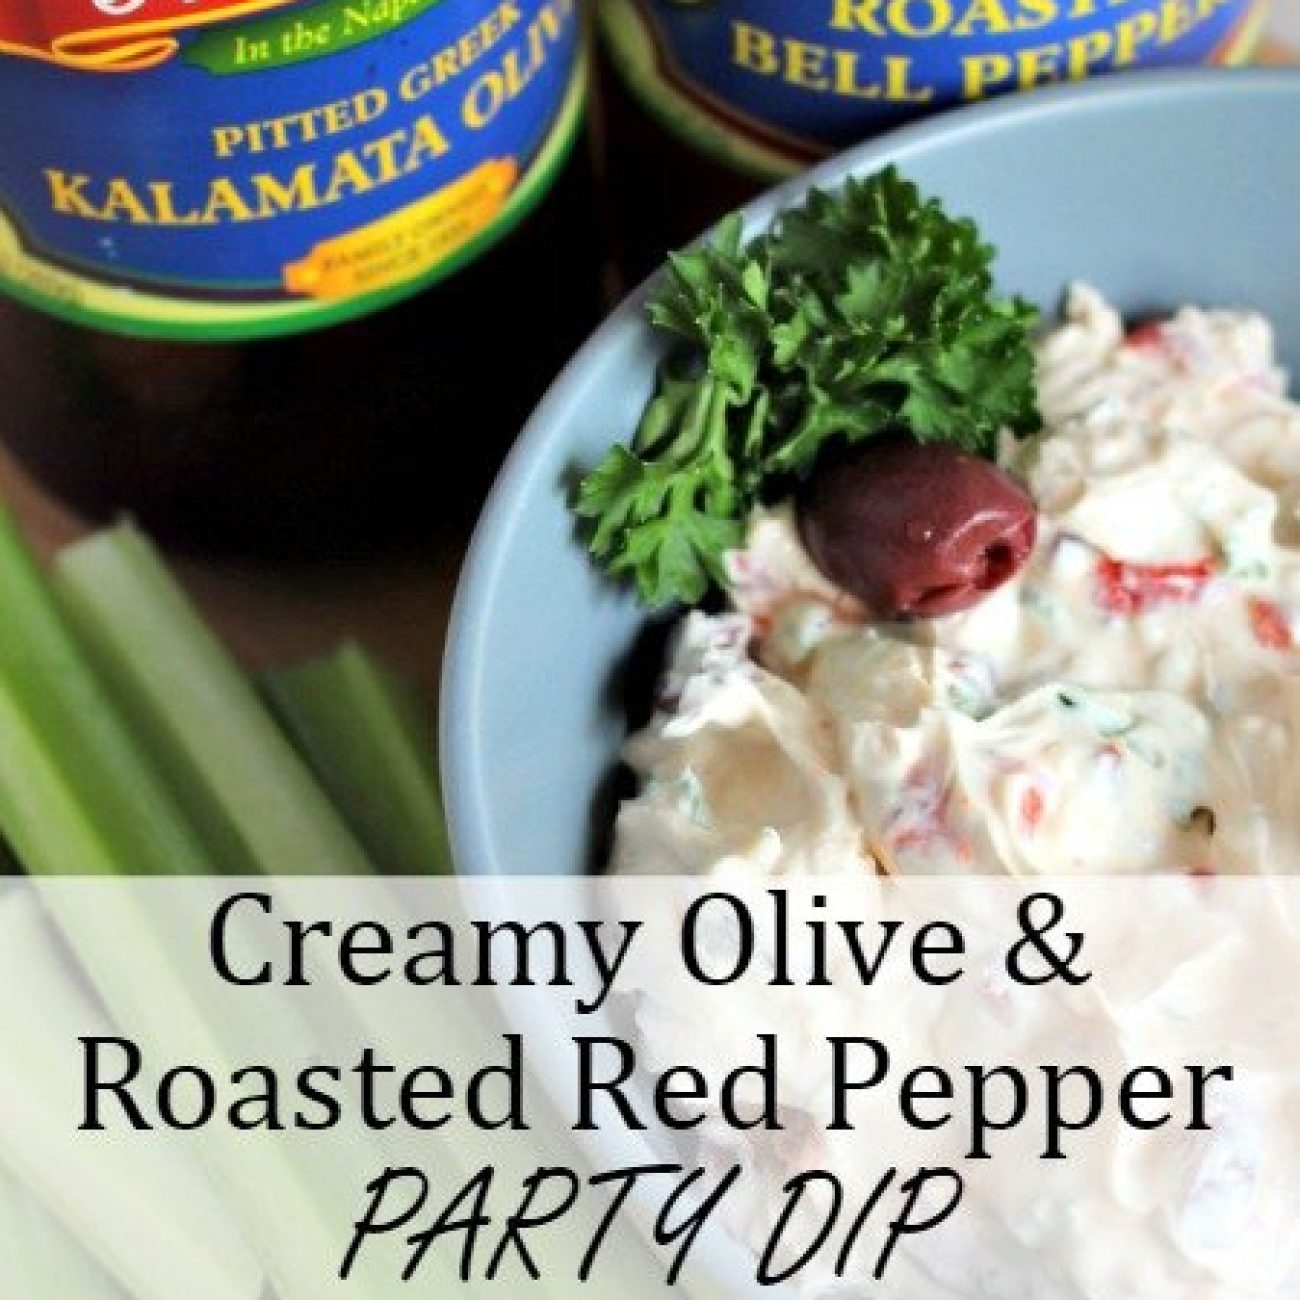 Blue Cheese & Roasted Pepper Spread